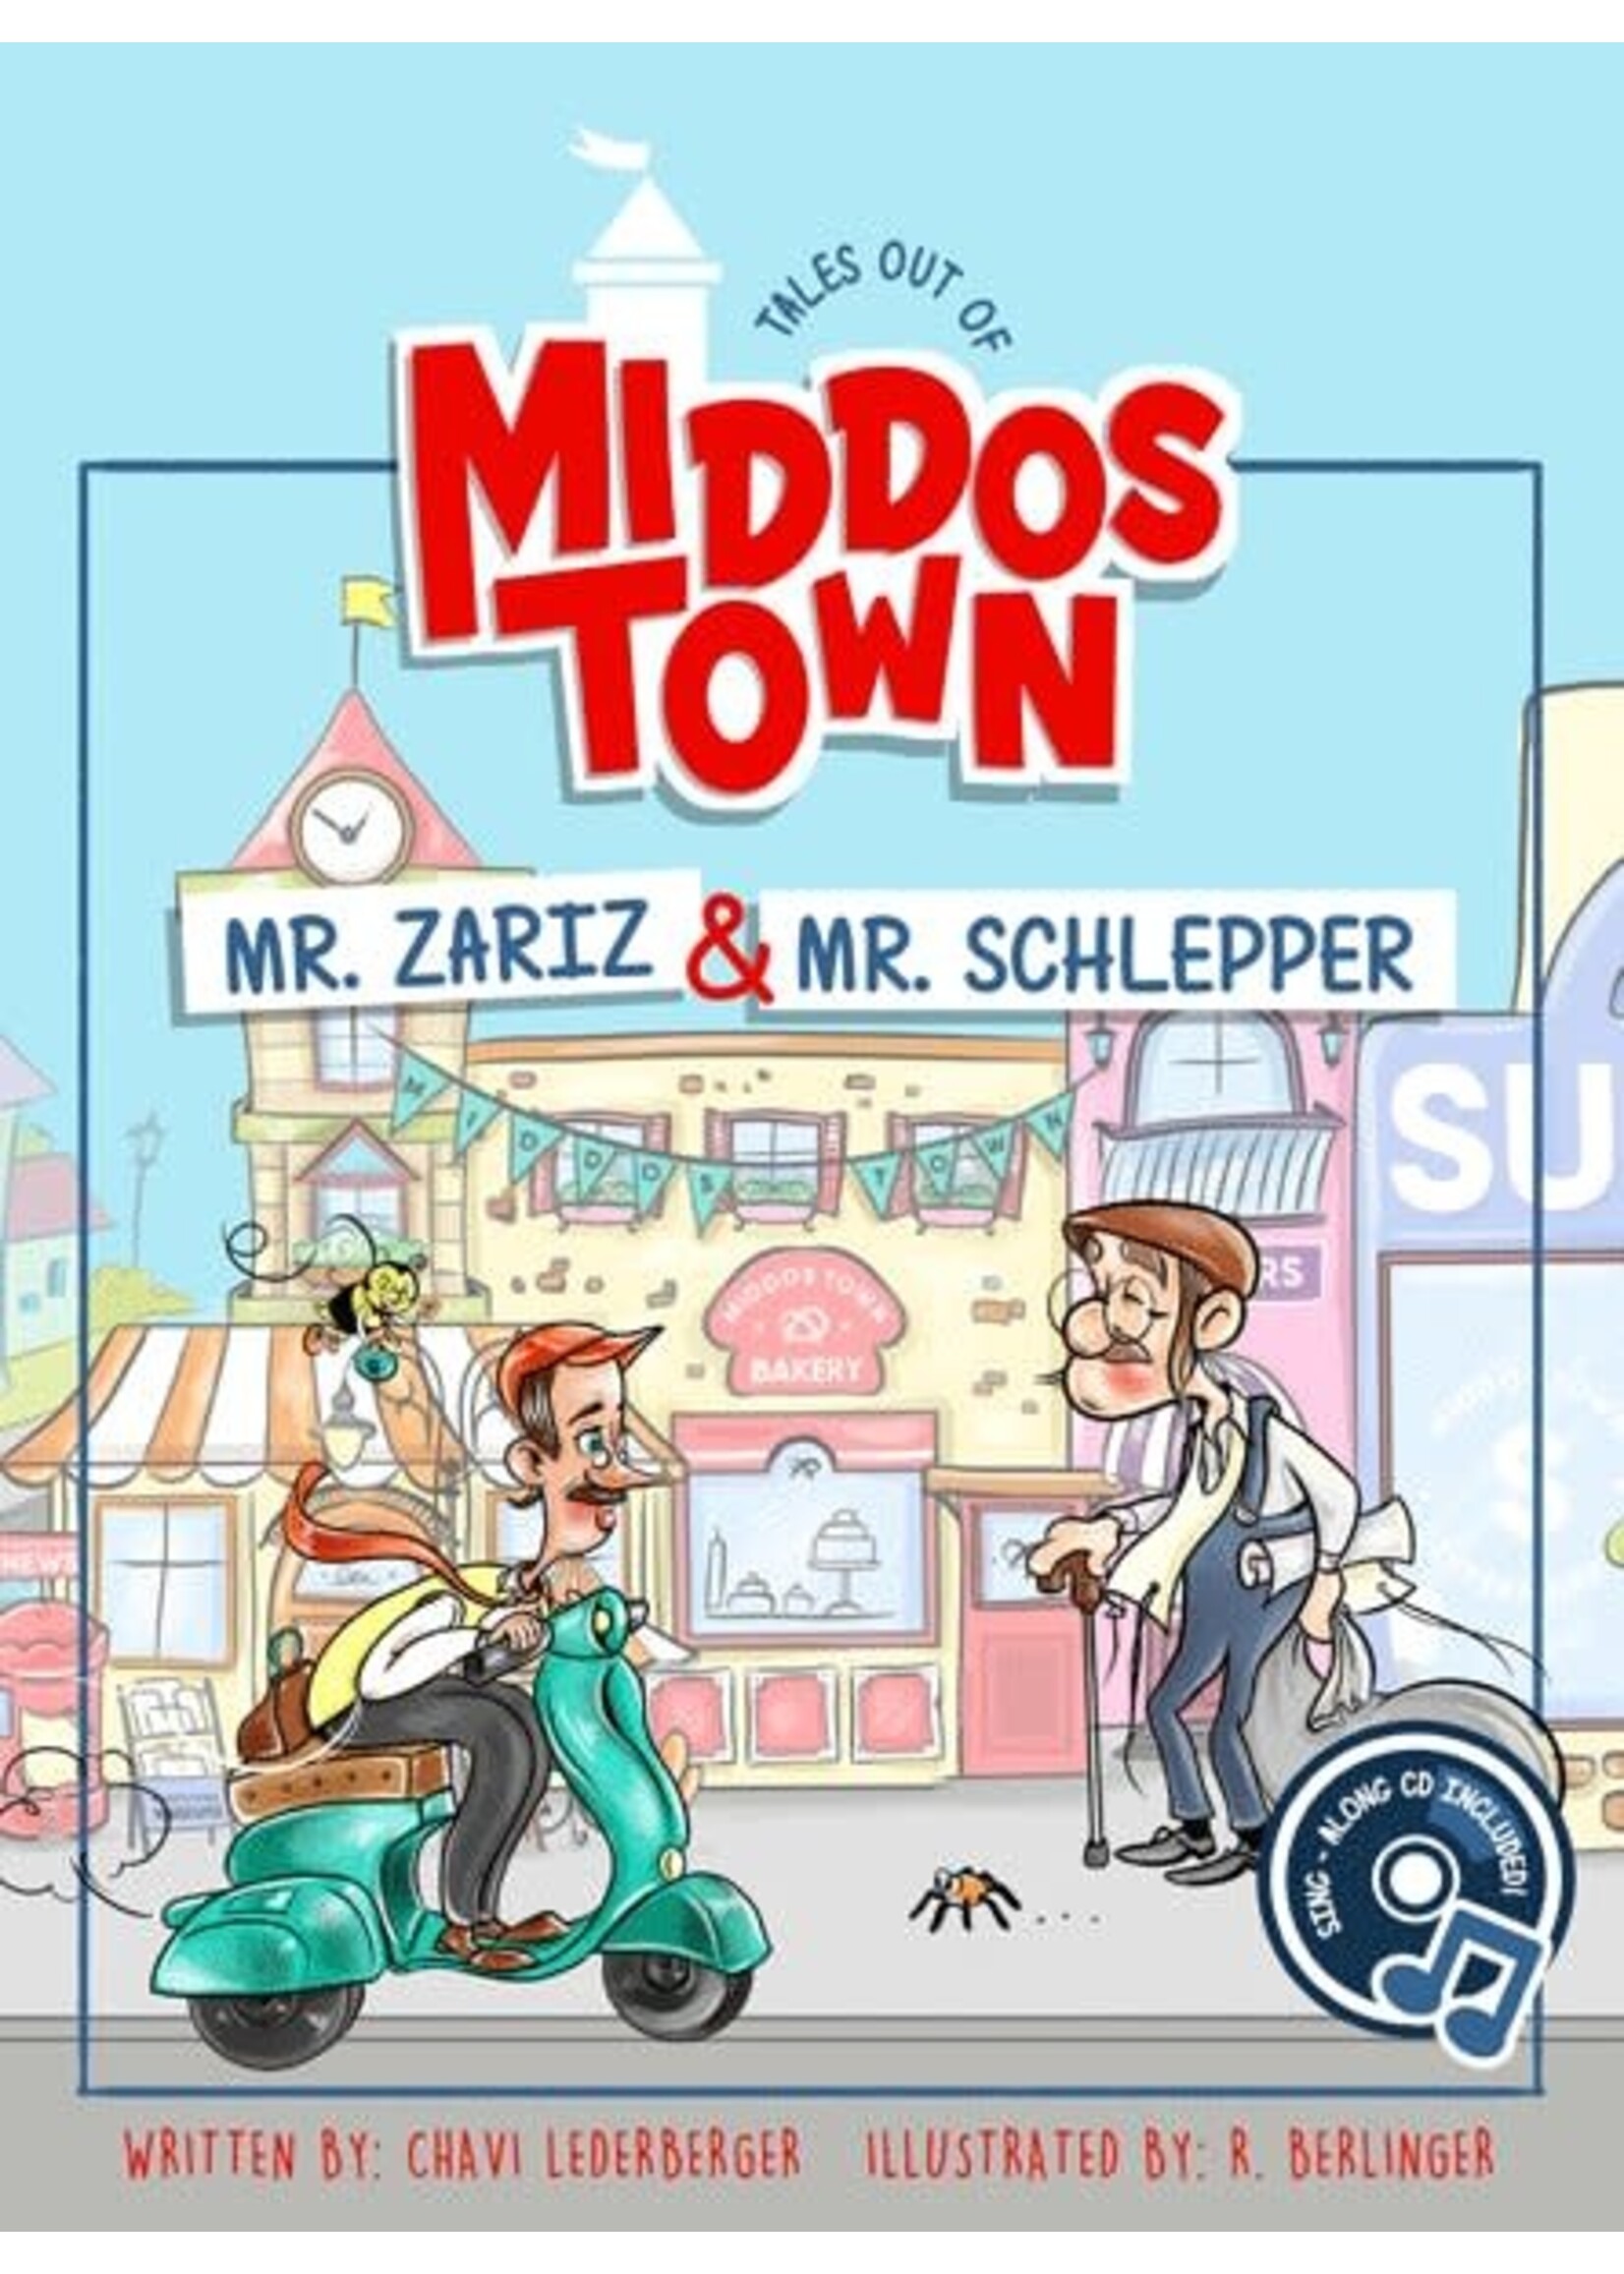 TALES OUT OF MIDDOS TOWN: VOL 1